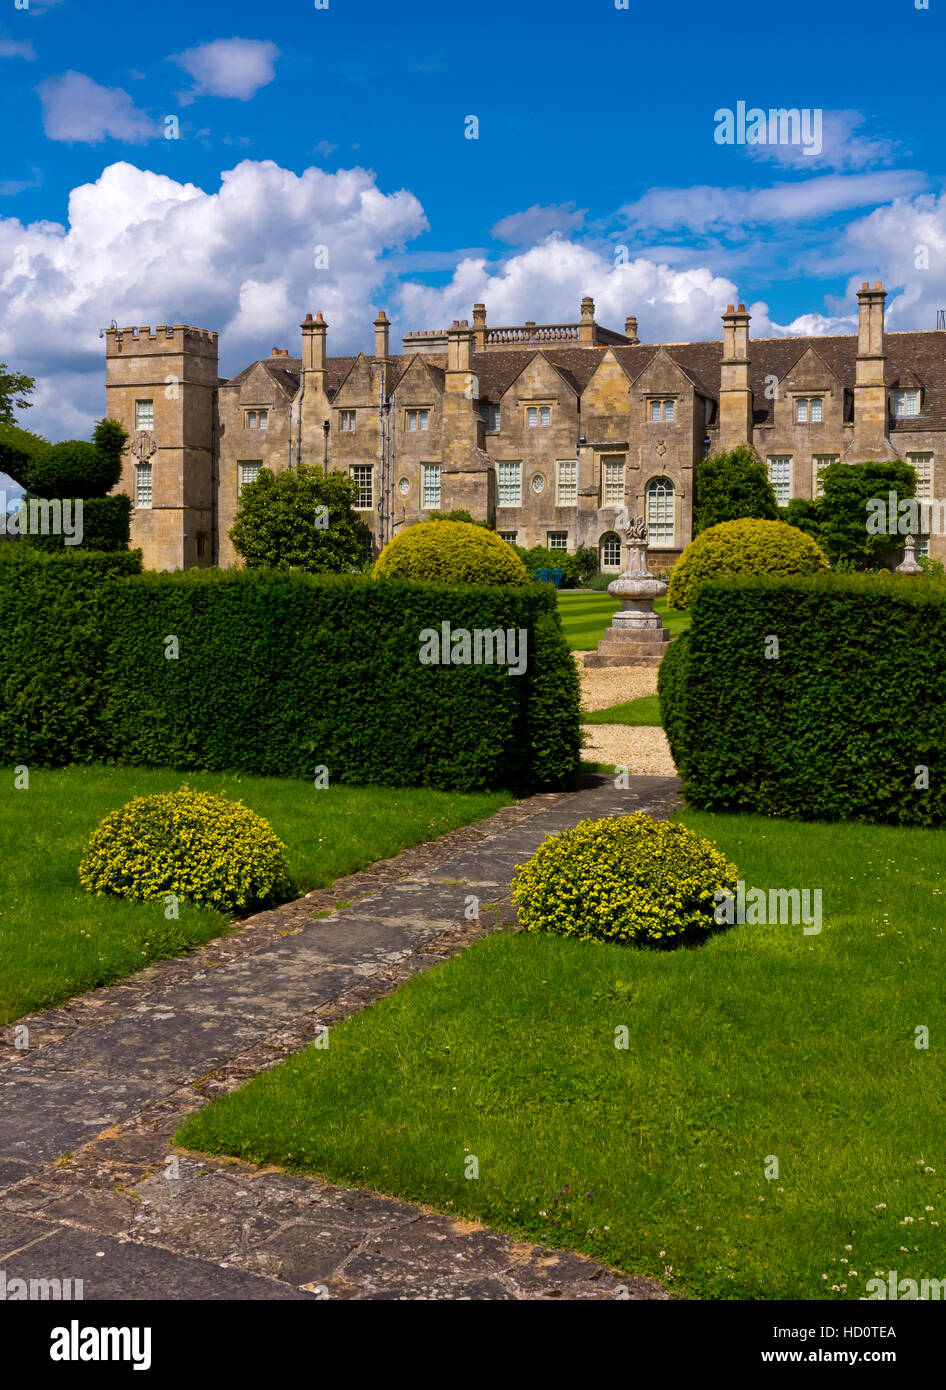 Grimsthorpe Castle in Lincolnshire England UK home of the De Eresby family since 1516 Stock Photo